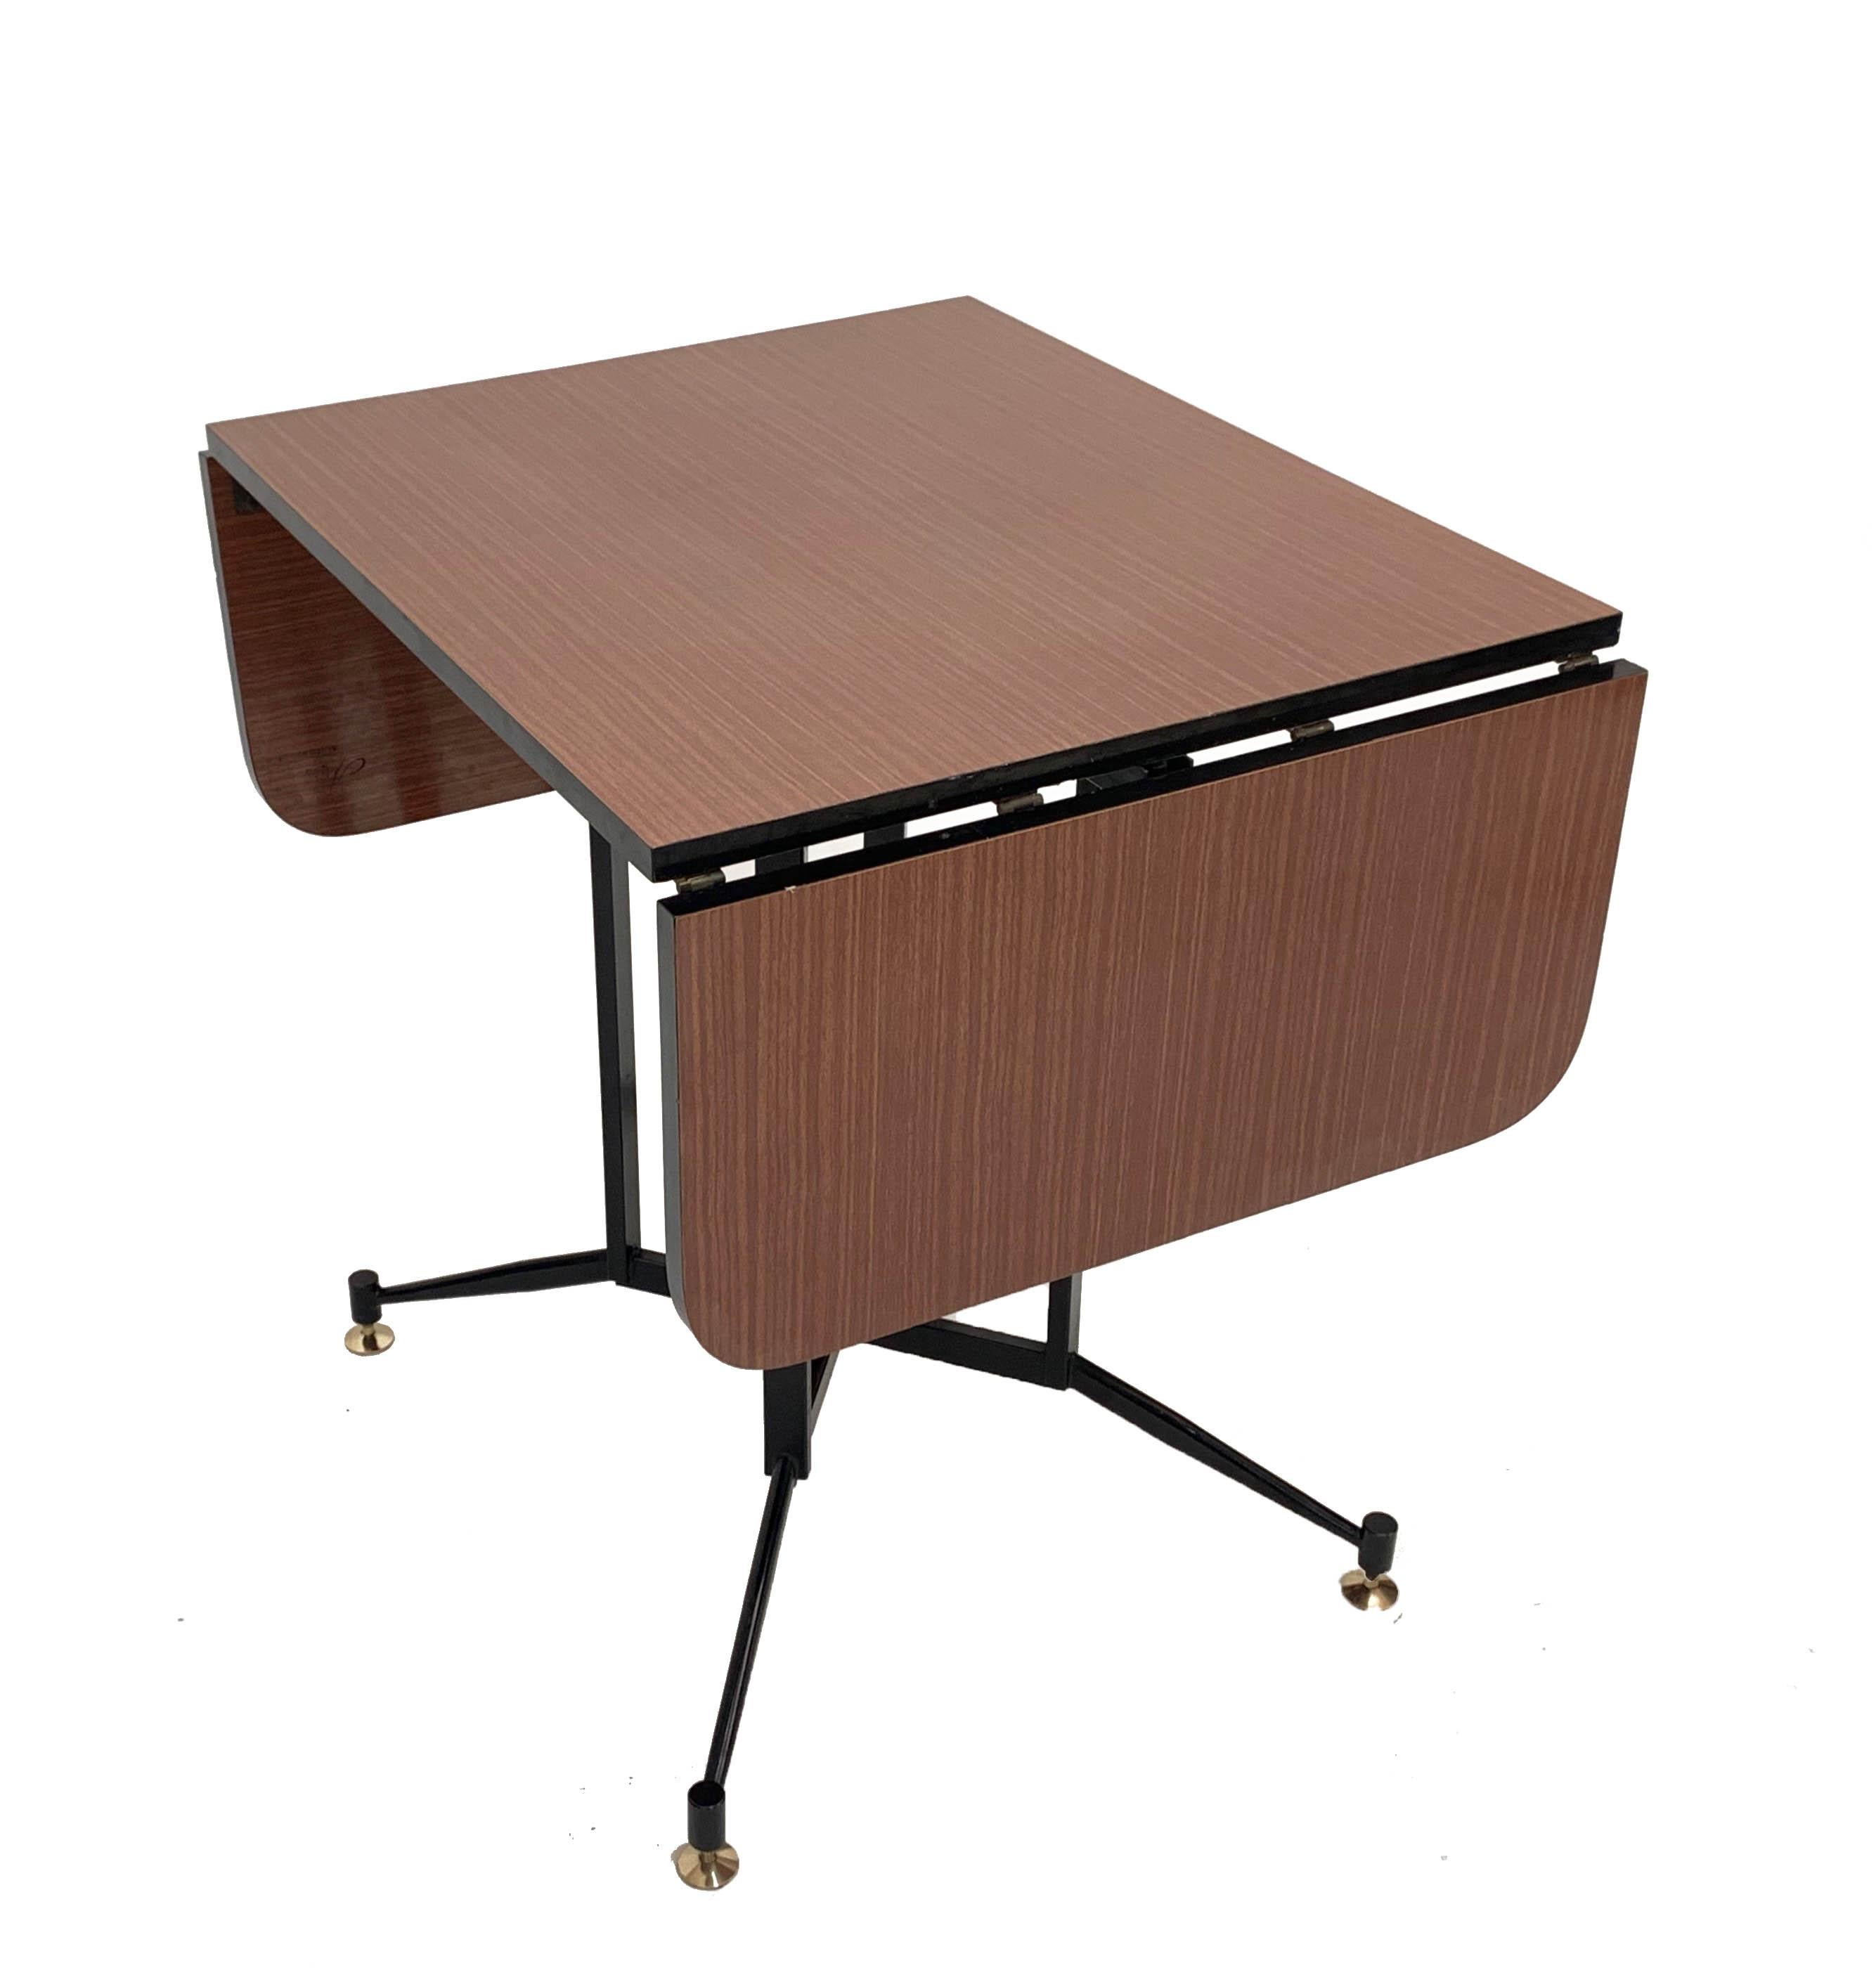 Gardella Midcentury Formica Steel and Brass Table, Laminati Plastici Italy 1950s For Sale 4